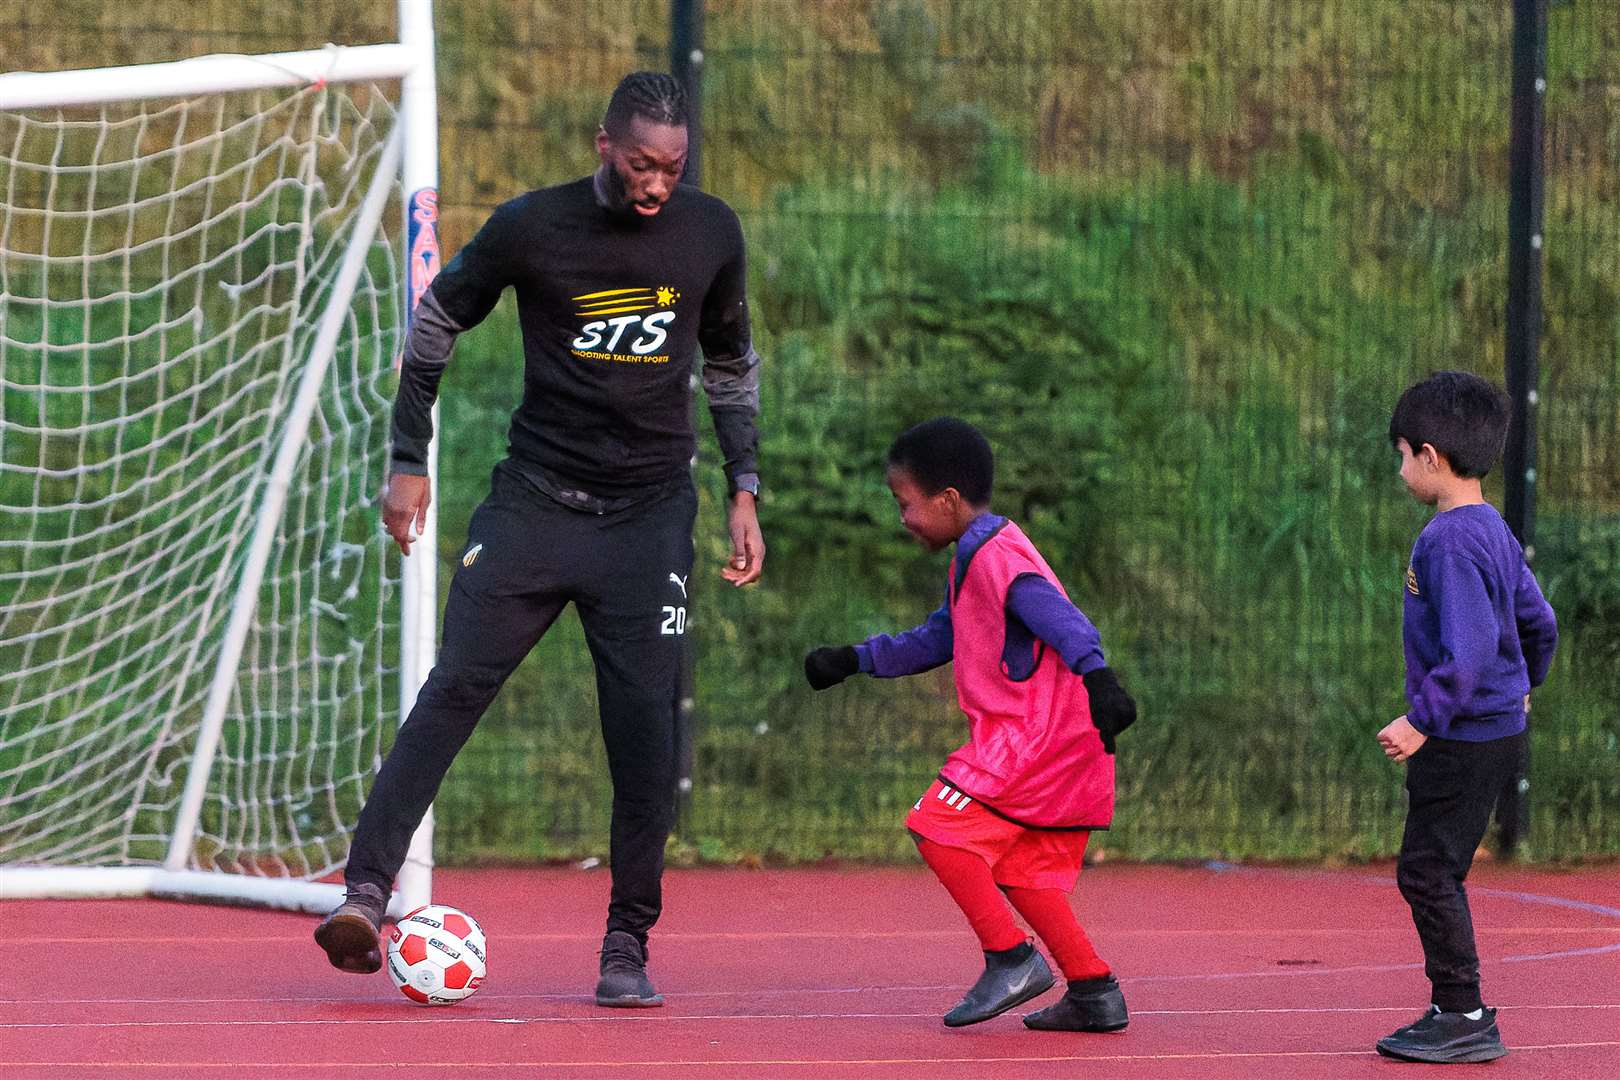 Blair Turgott thrives on being a role model for kids through his Shooting Talent Sports programme. Picture: Helen Cooper